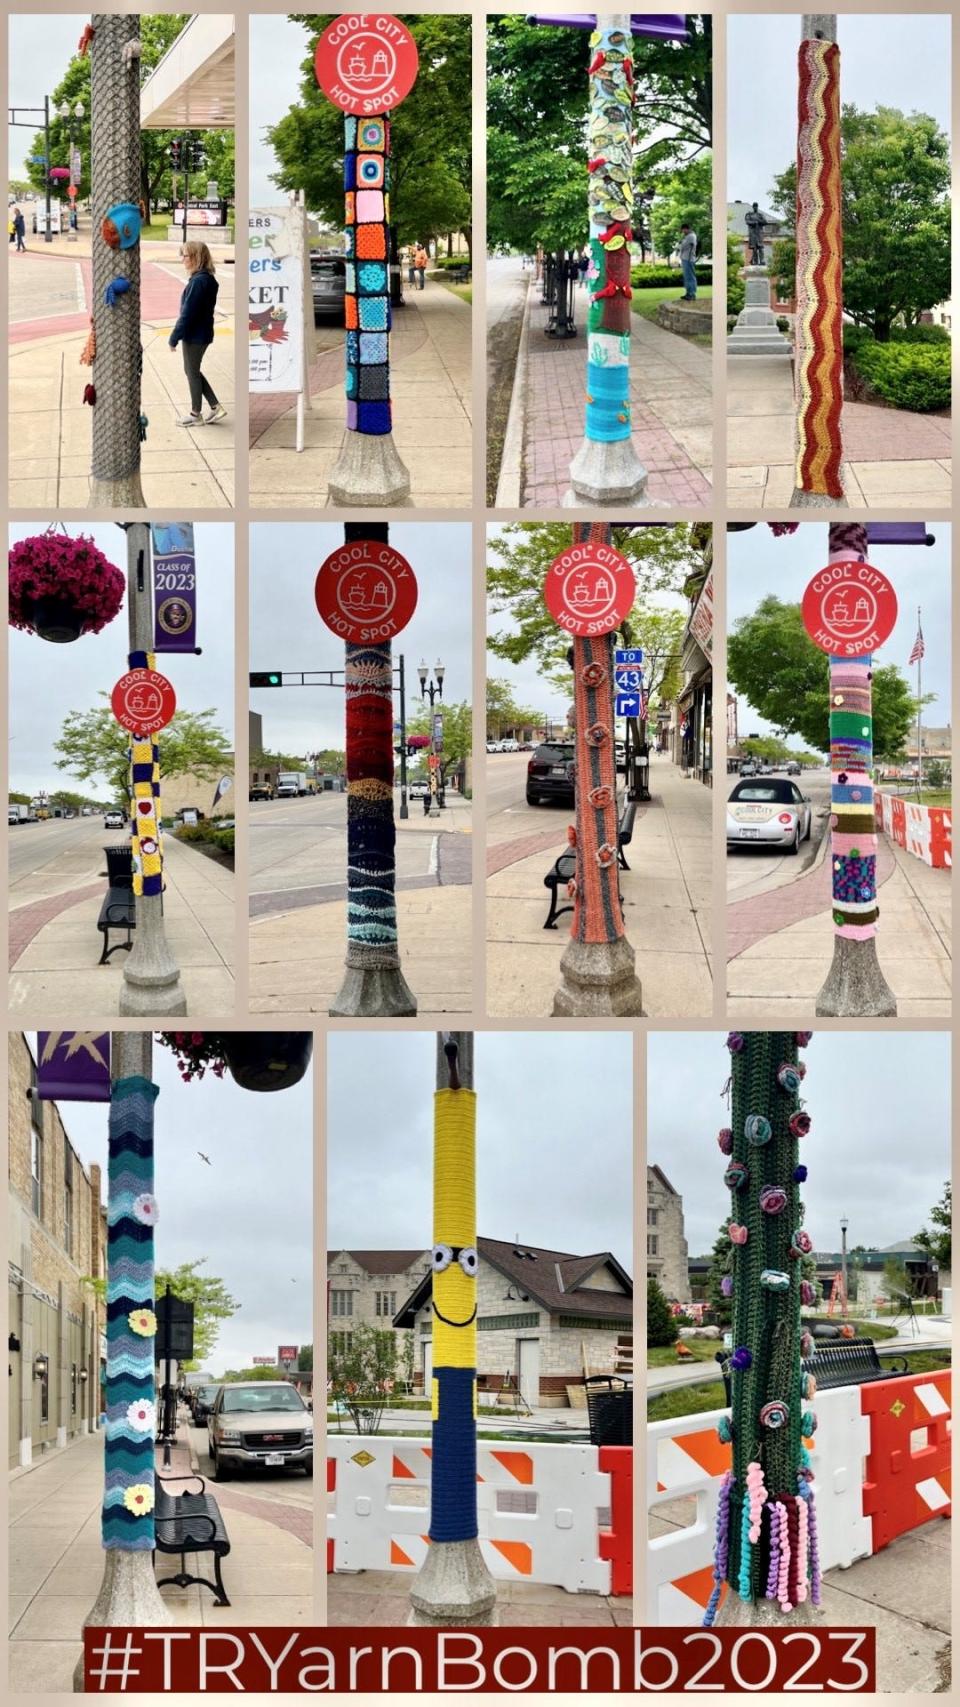 ‘Yarn bomb’ work done on light posts in downtown Two Rivers.